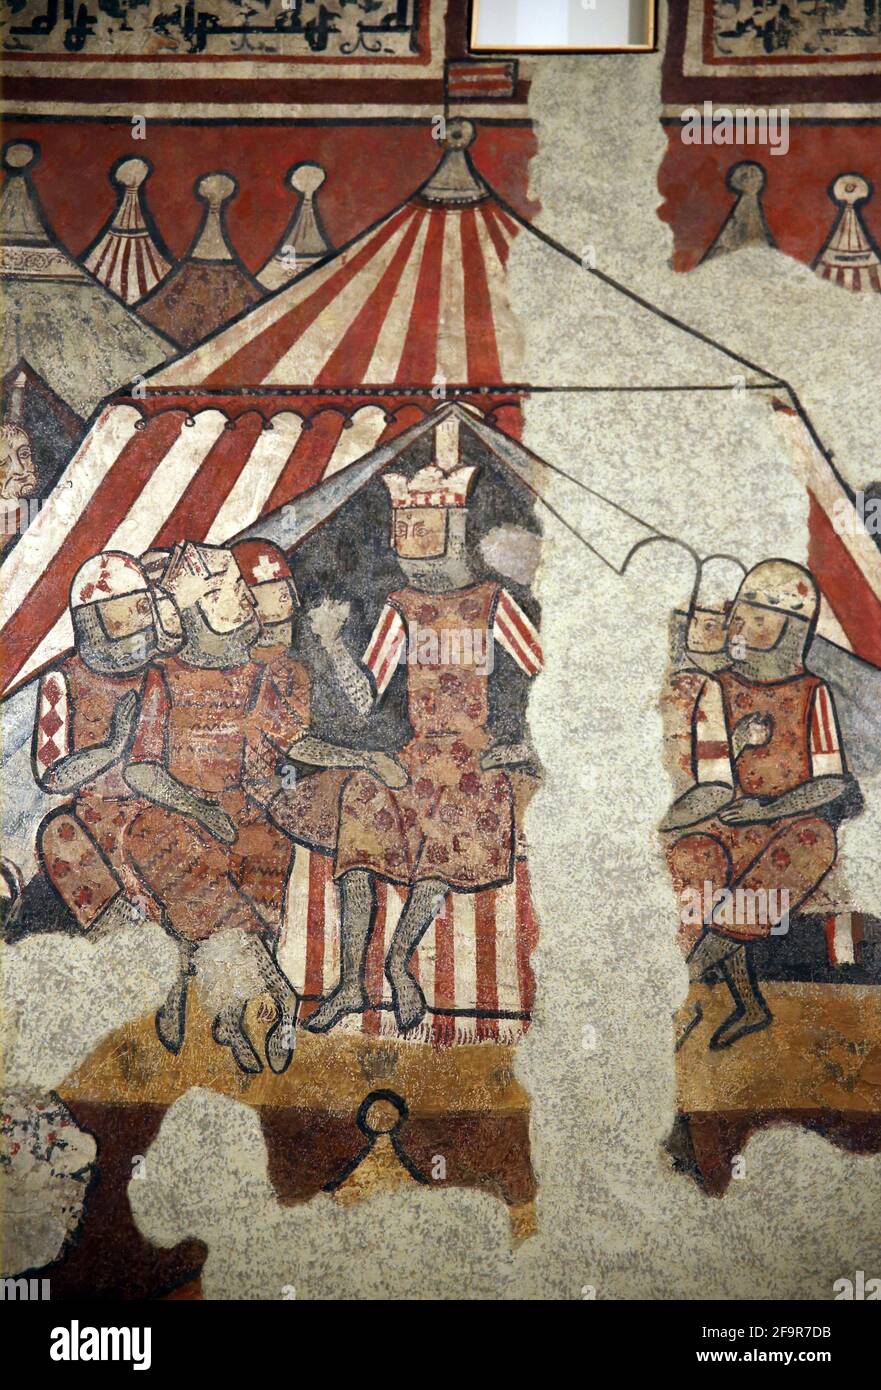 Paintings of Conquest of Majorca, 1285-90. Palace Berenguer Aguilar, Barcelona. Royal Camp with James I. National Art Museum of Catalonia. Barcelona. Stock Photo